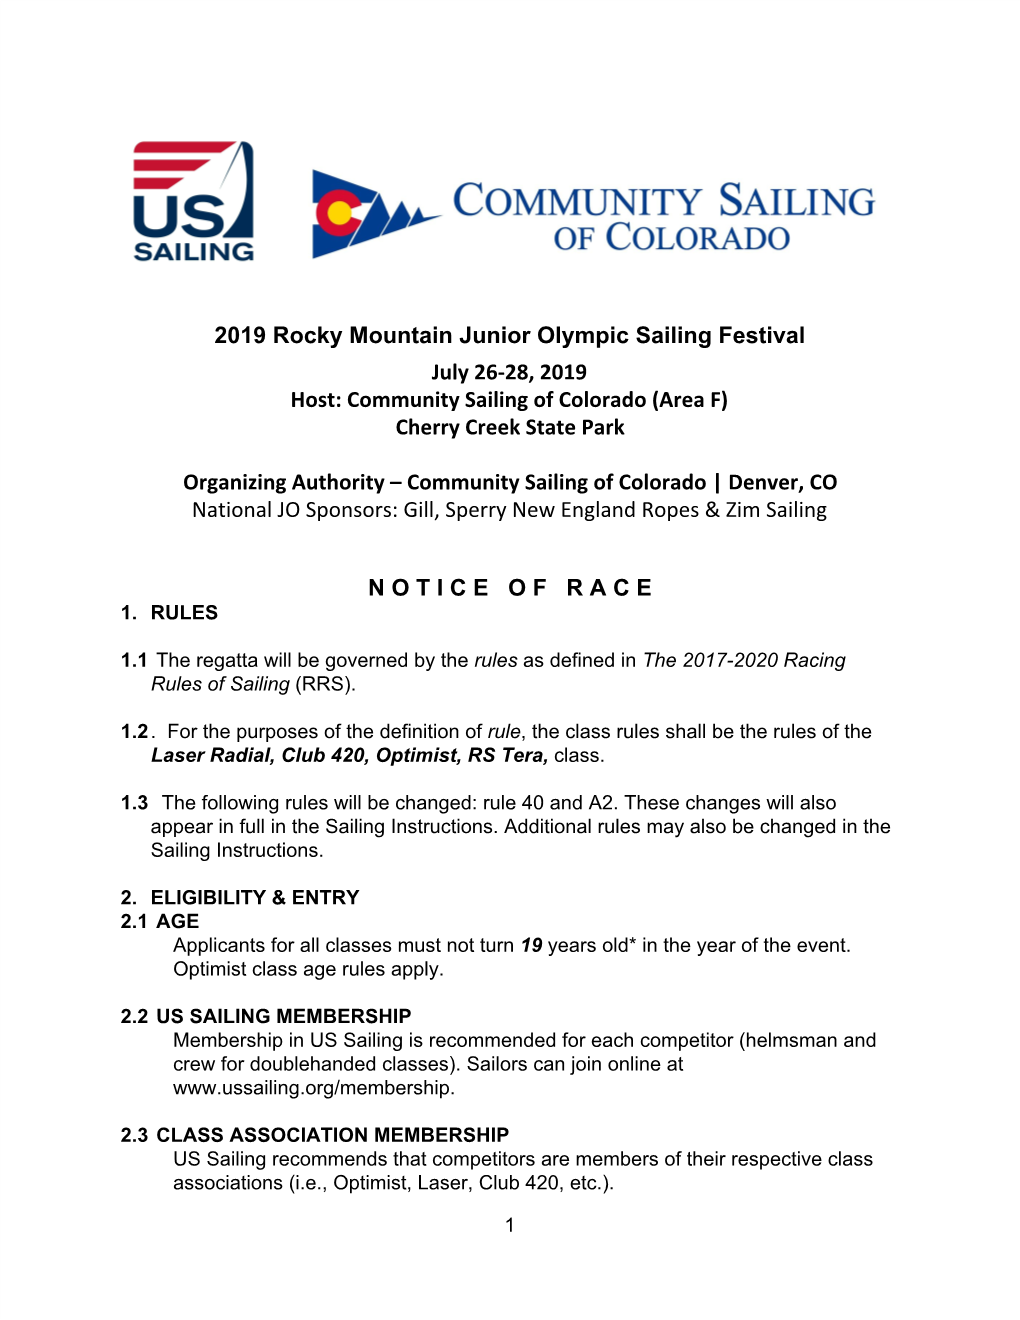 2019 Rocky Mountain Junior Olympic Sailing Festival July 26-28, 2019 Host: Community Sailing of Colorado (Area F) Cherry Creek State Park